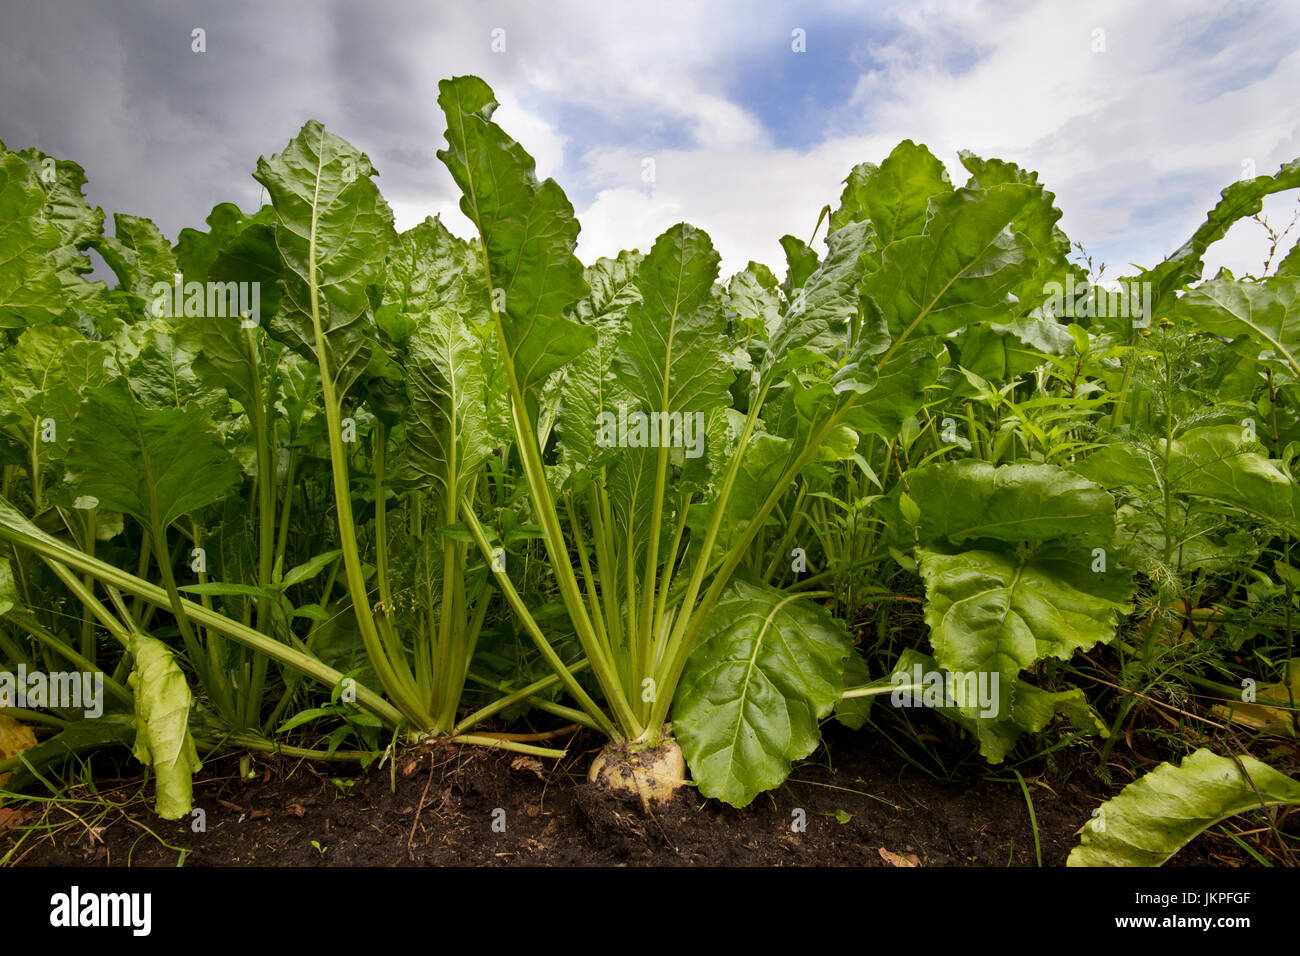 Row of sugar beet under dark clouds, seen from a low point of view Stock Photo